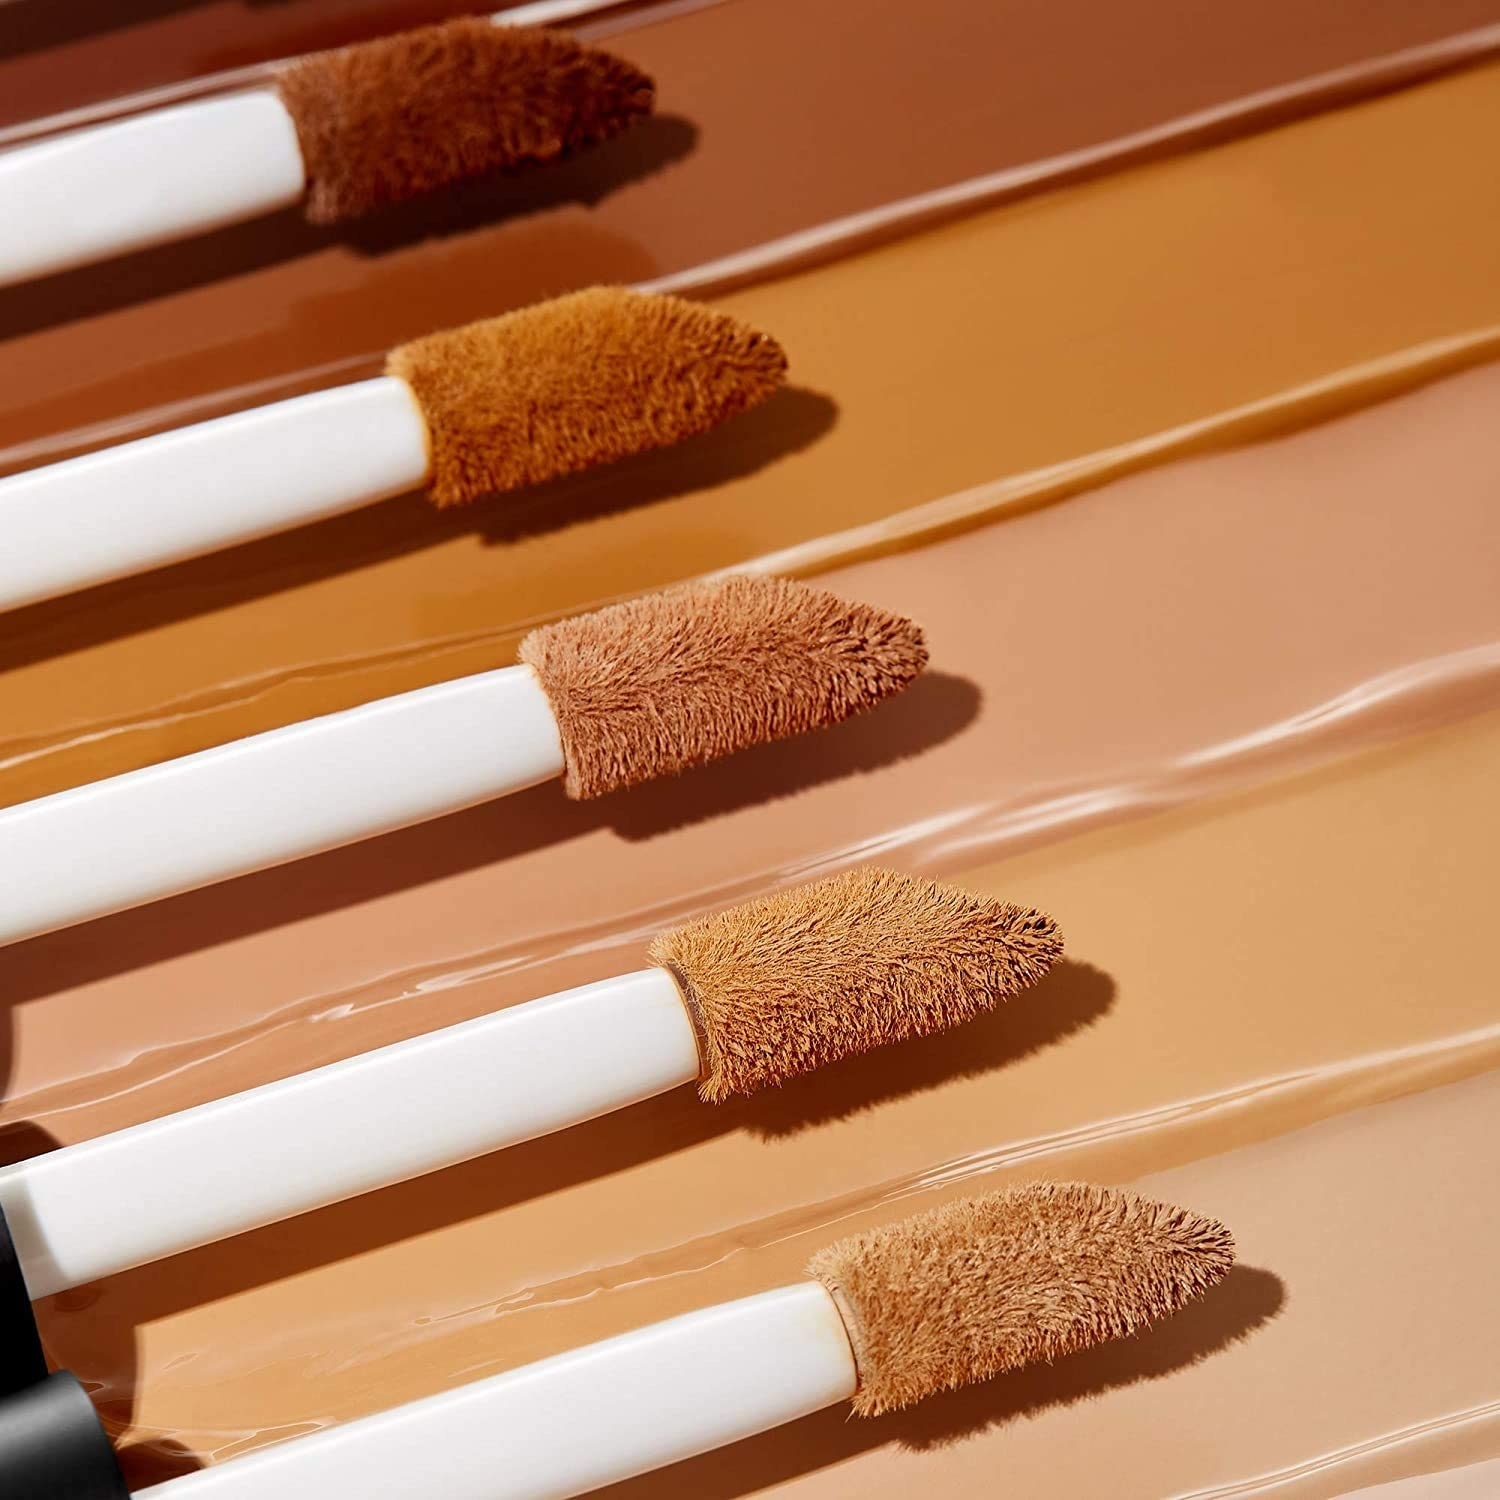 five different shades of concealer underneath their respective brushes